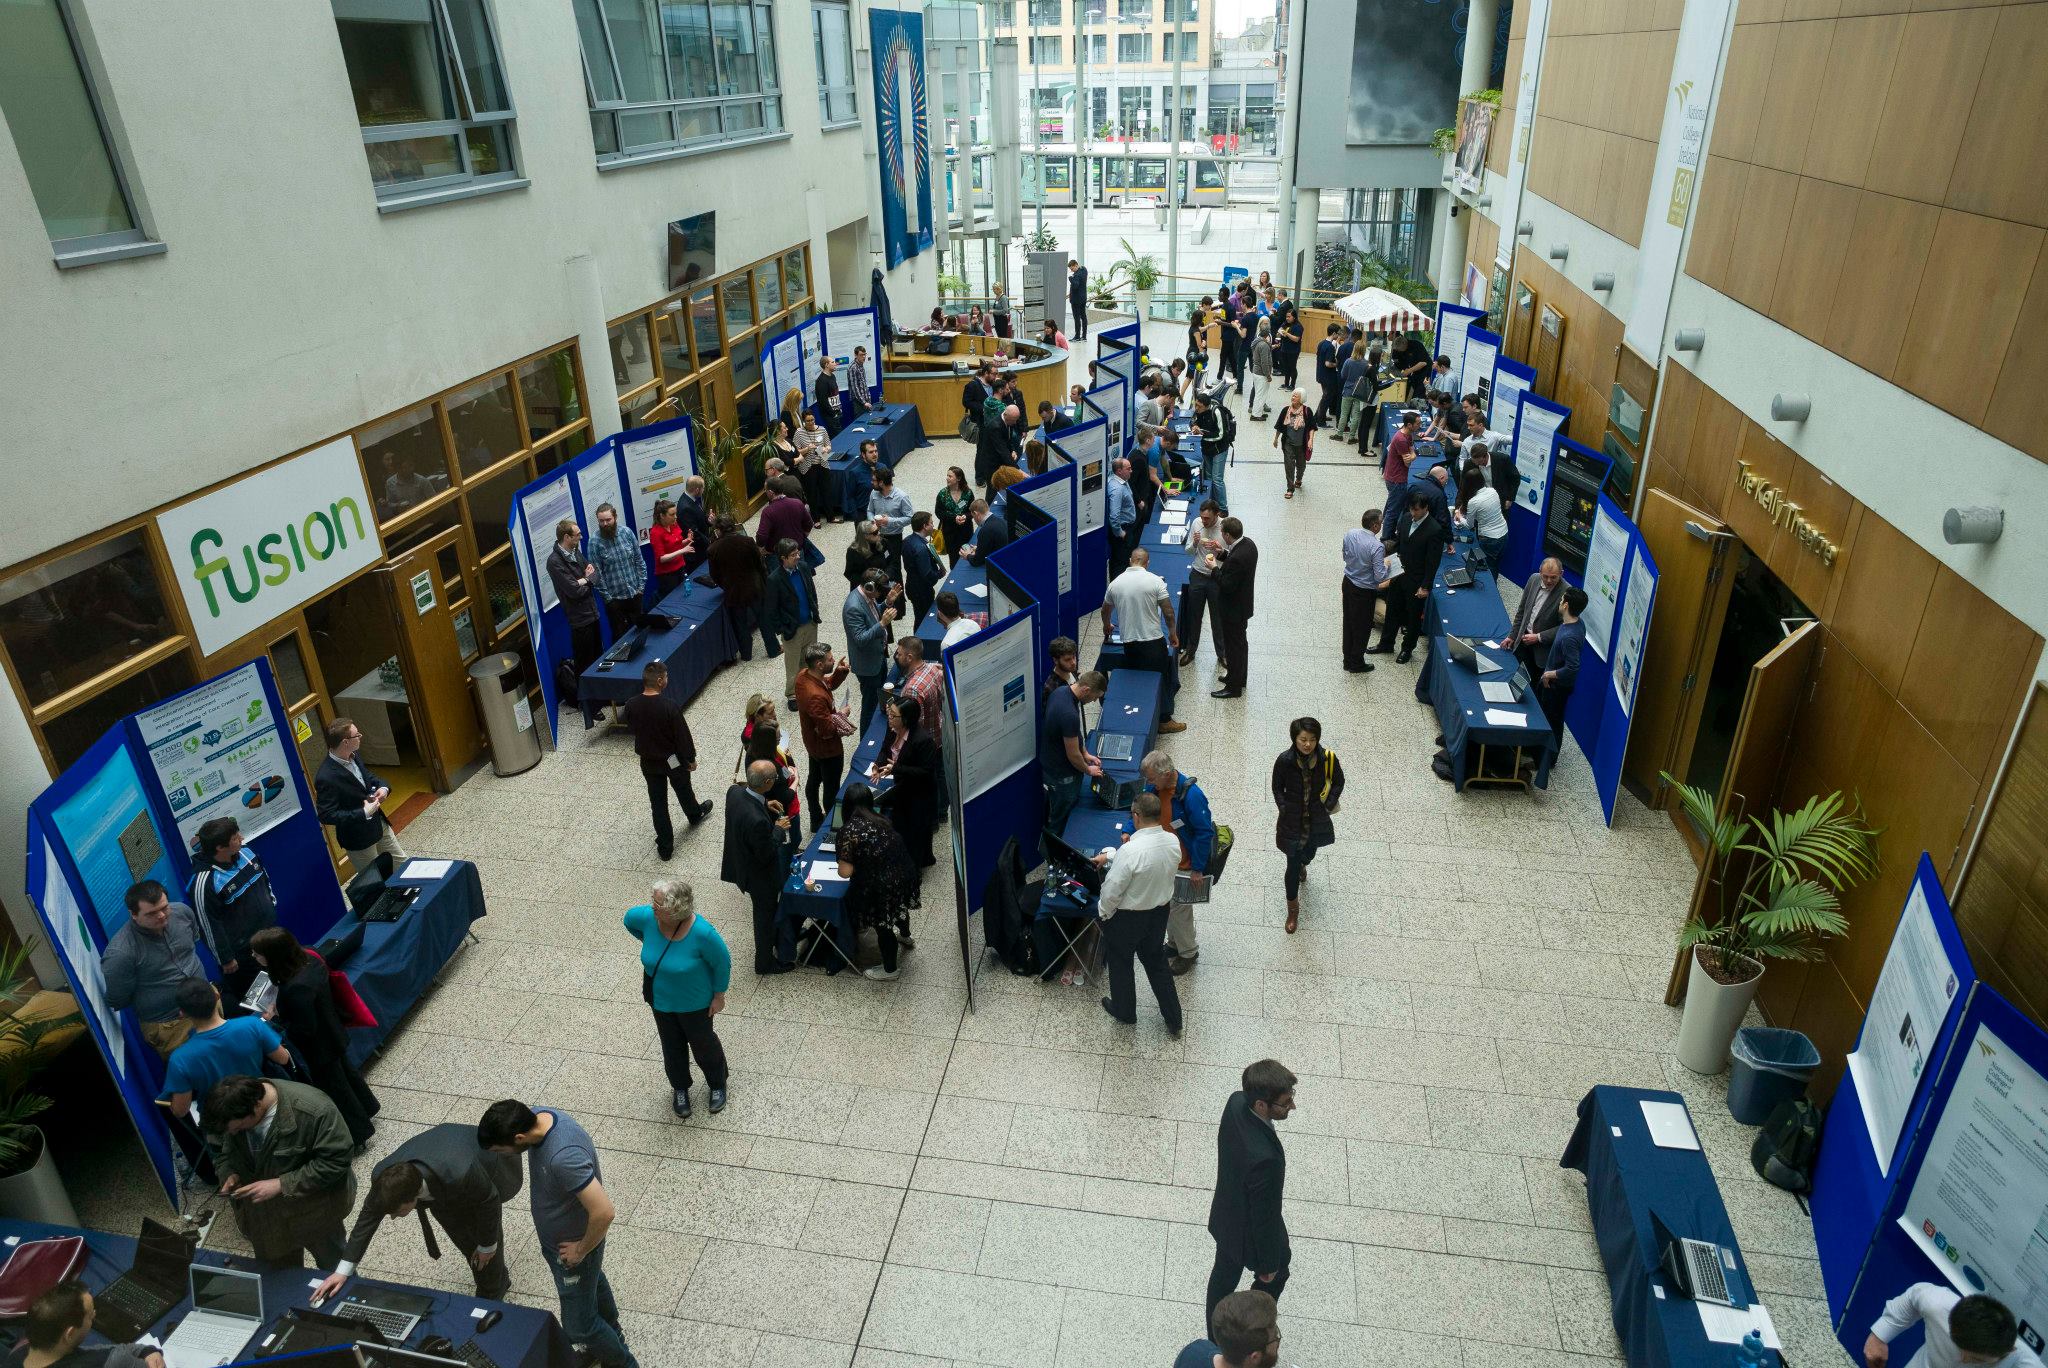 Summer Events in Dublin at National College of Ireland